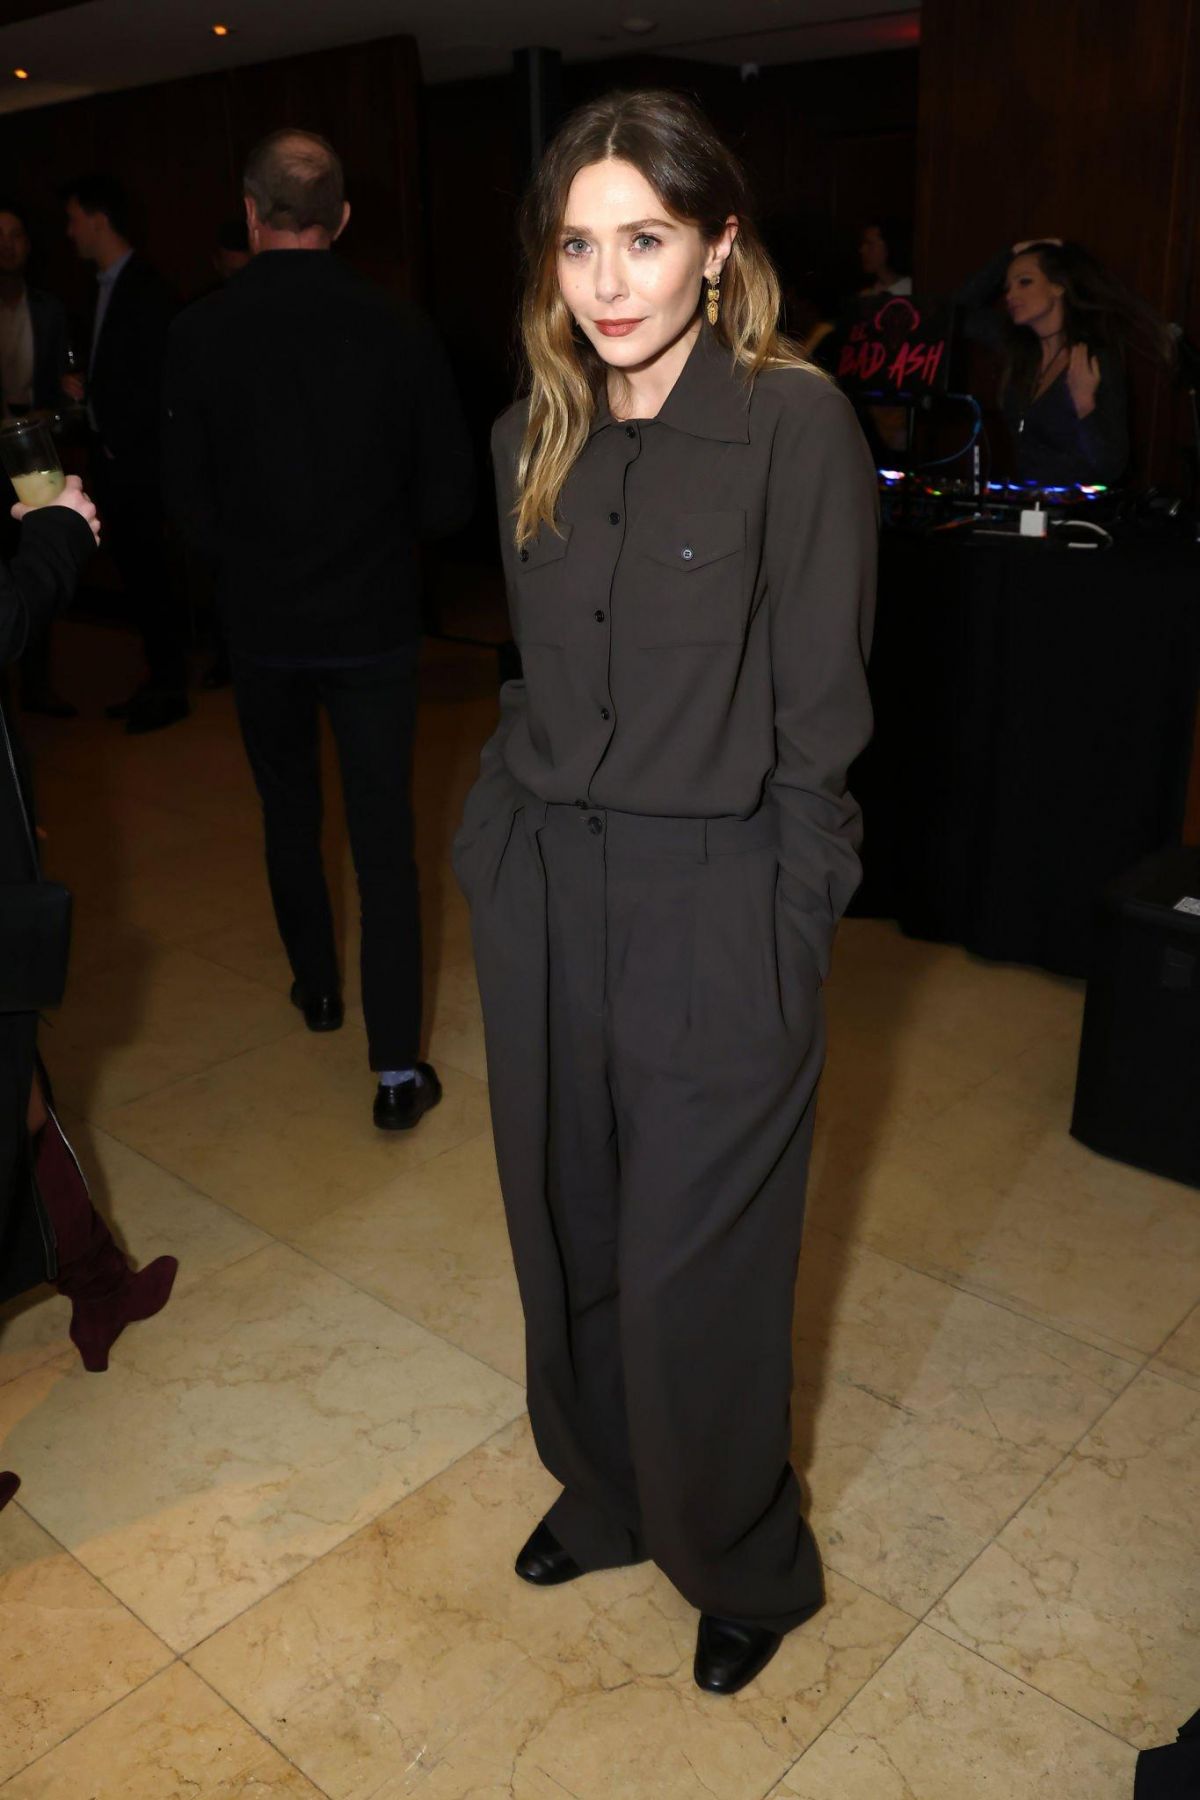 Elizabeth Olsen in Chic Black Ensemble at The Iron Claw Premiere Afterparty LA 1